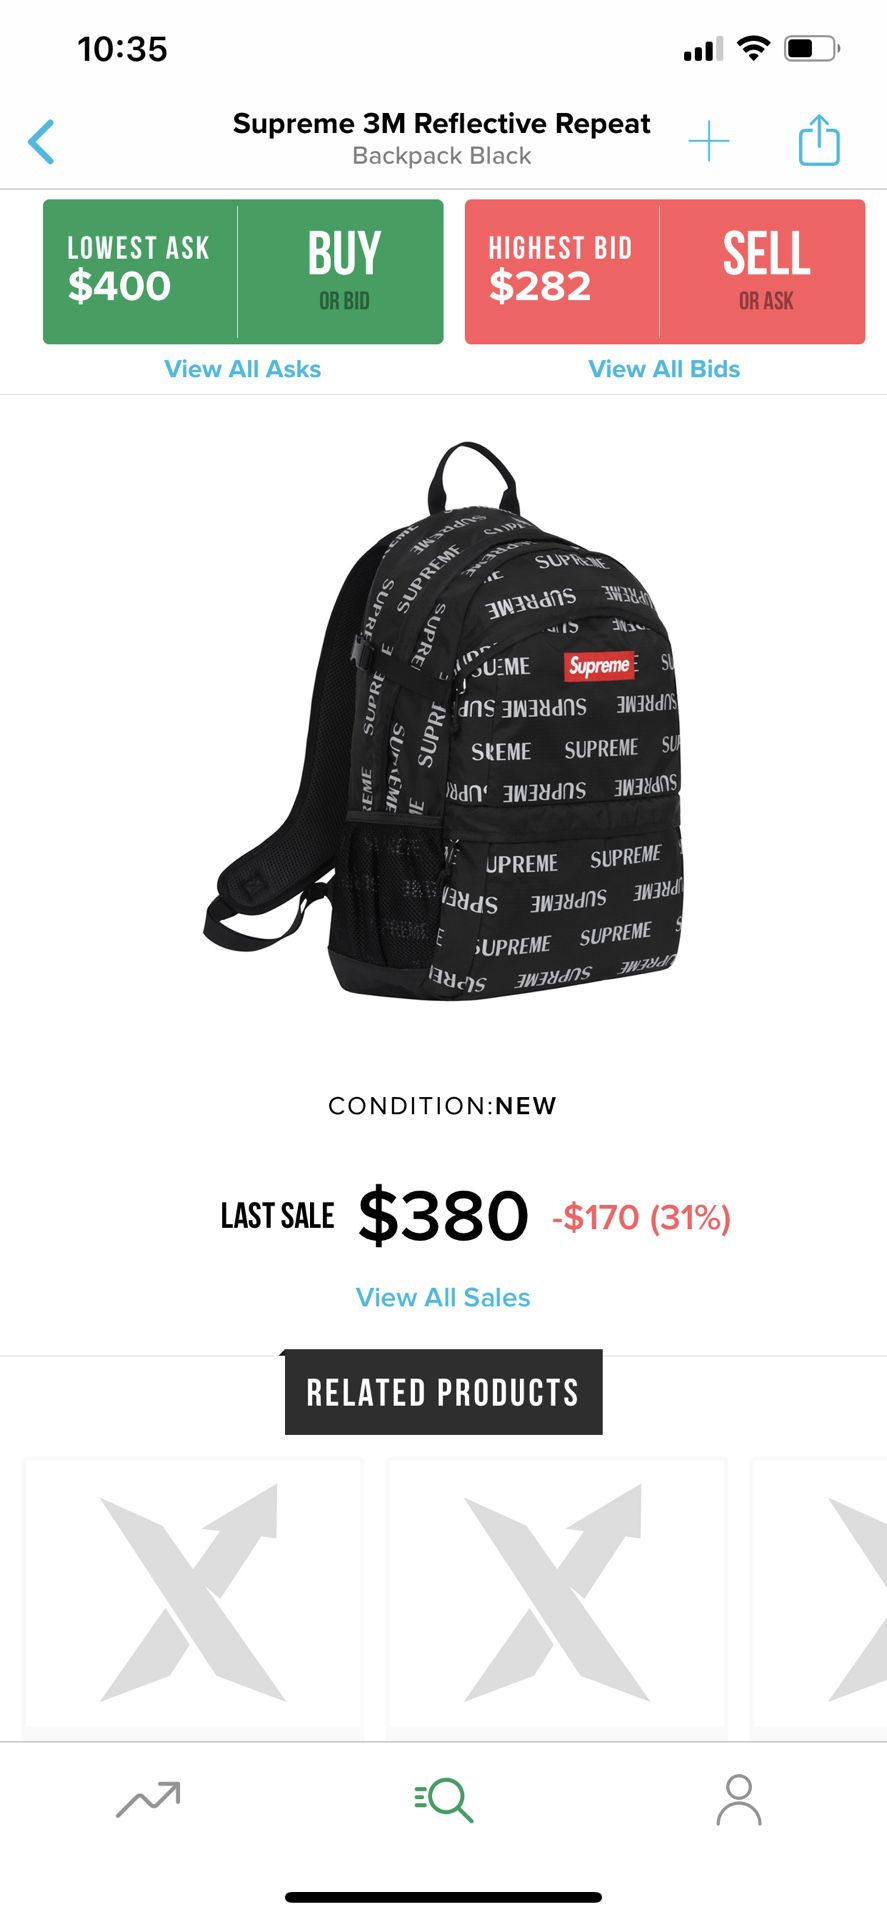 Supreme 3m Reflective Repeat Backpack